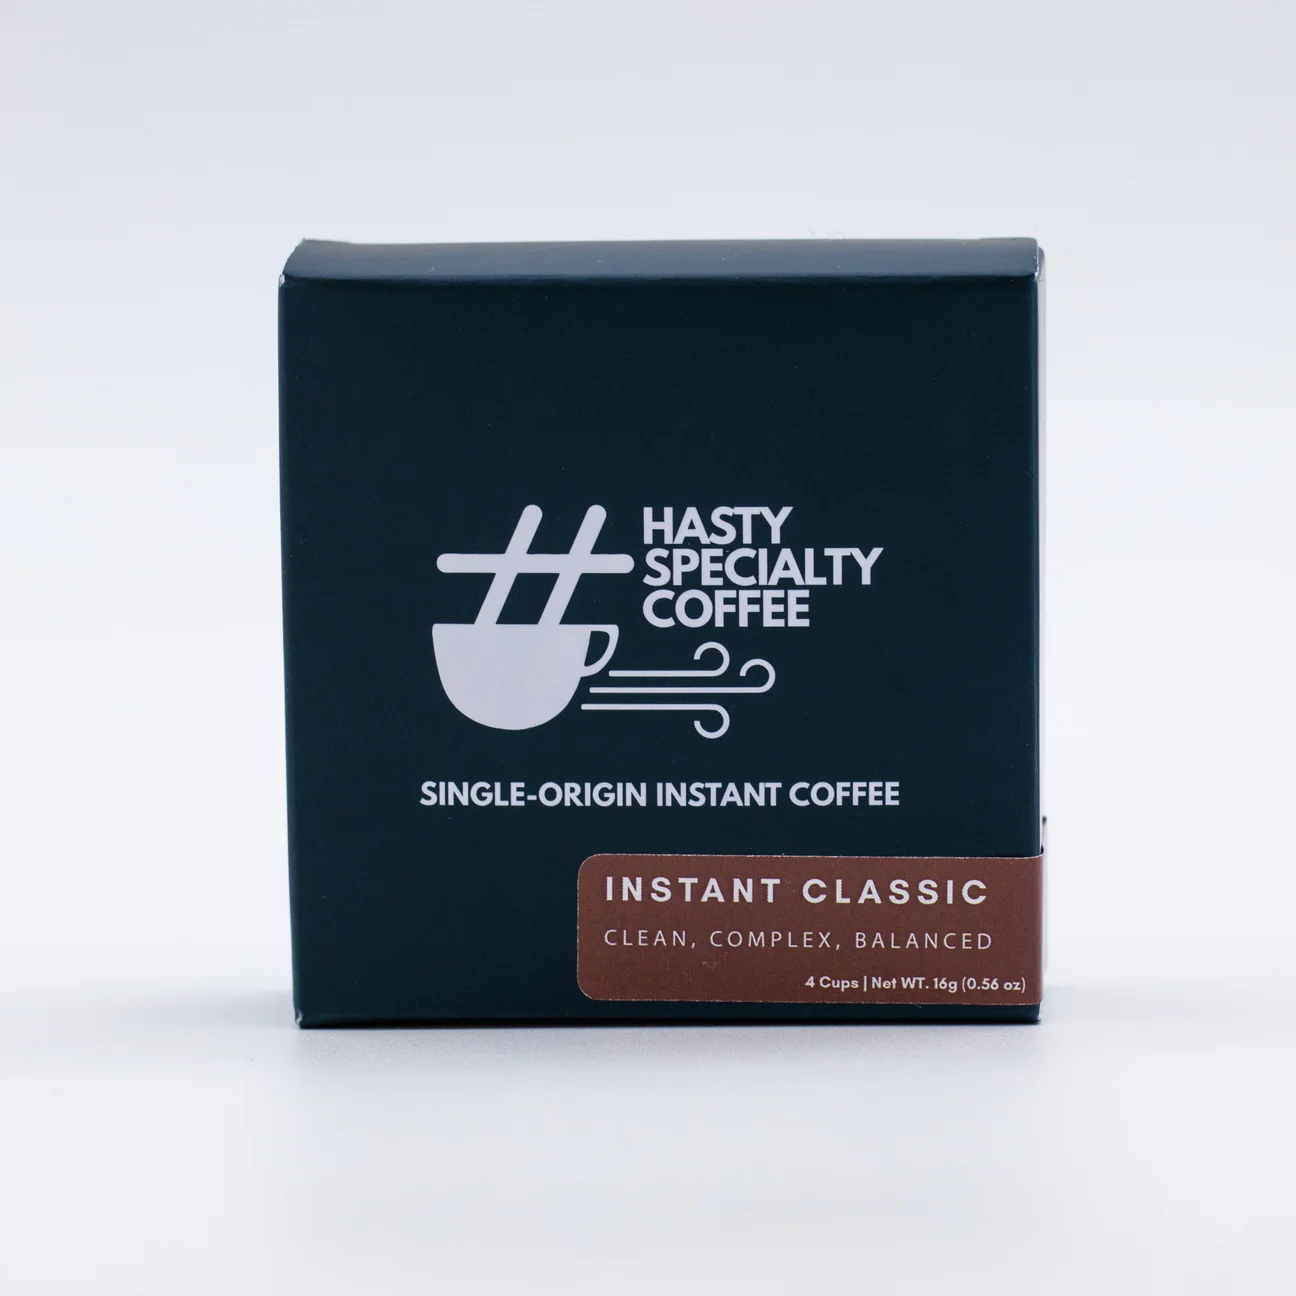 Hasty Instant Specialty Coffee - Instant Classic Box